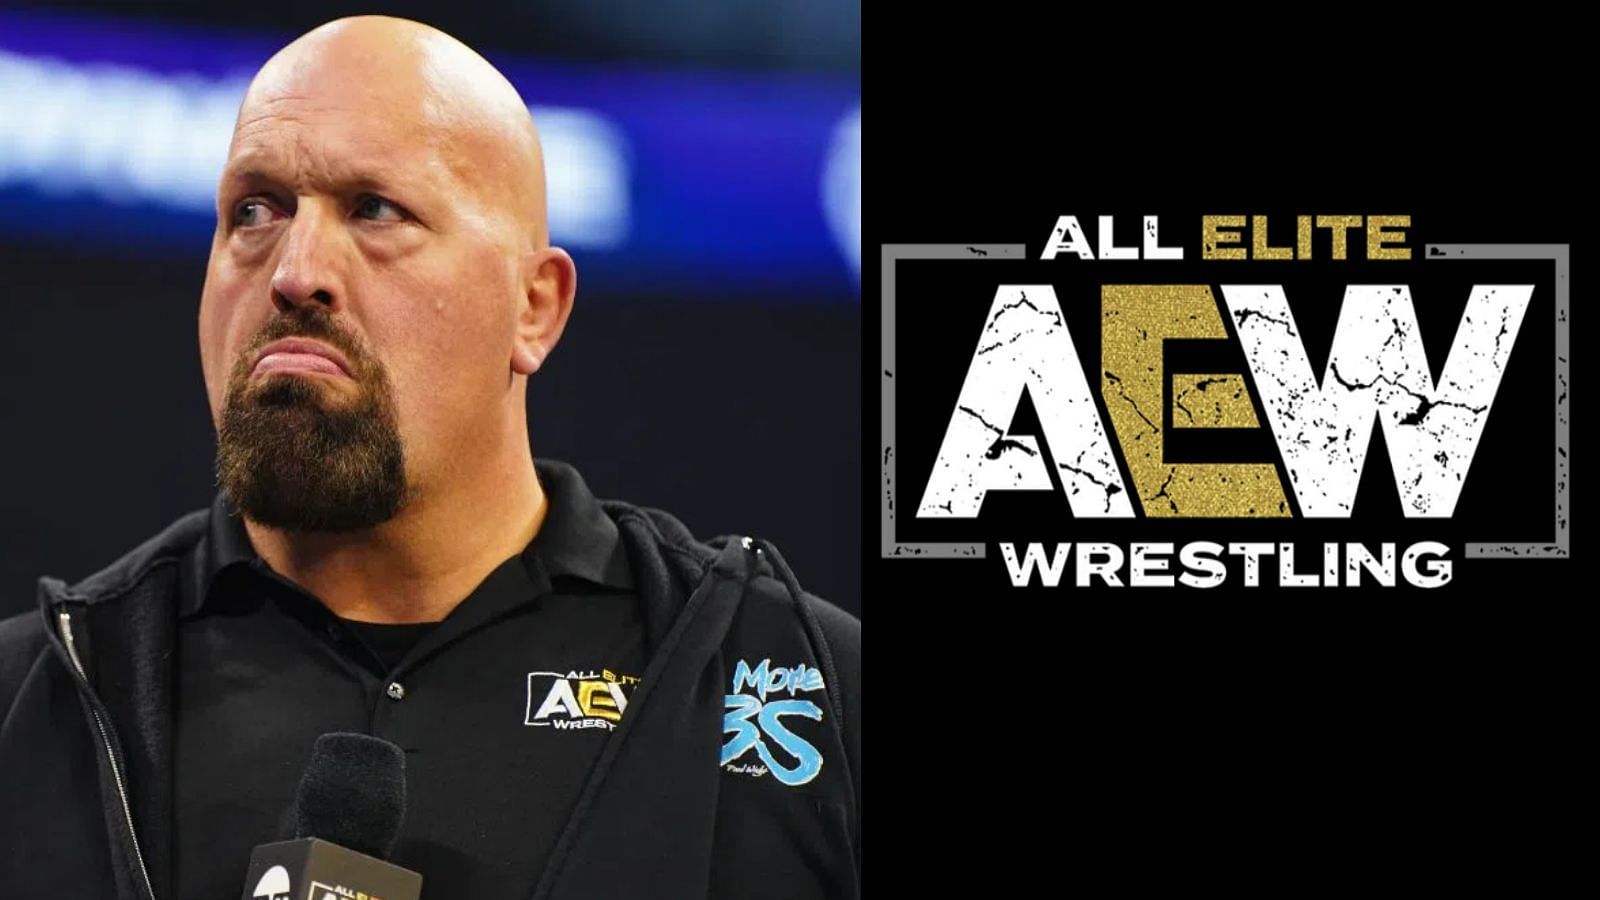 Wight has been with AEW since February 2021.